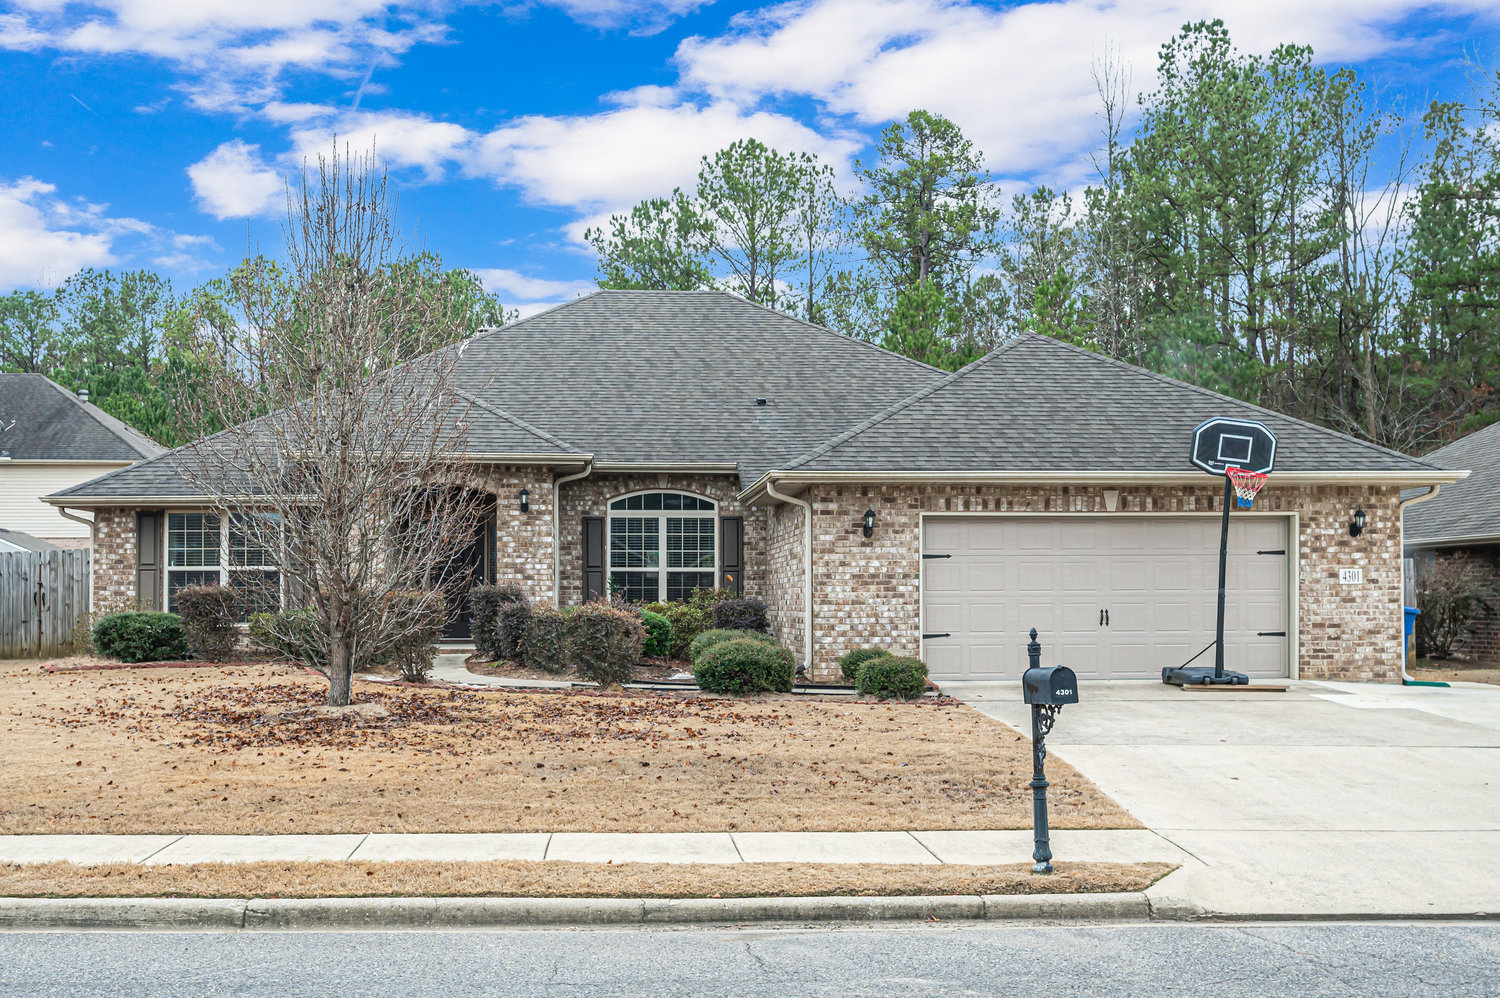 Virtual Tour of Birmingham Metro Real Estate Listing For Sale | 4301 Old Cahaba Parkway, Helena, AL 35080